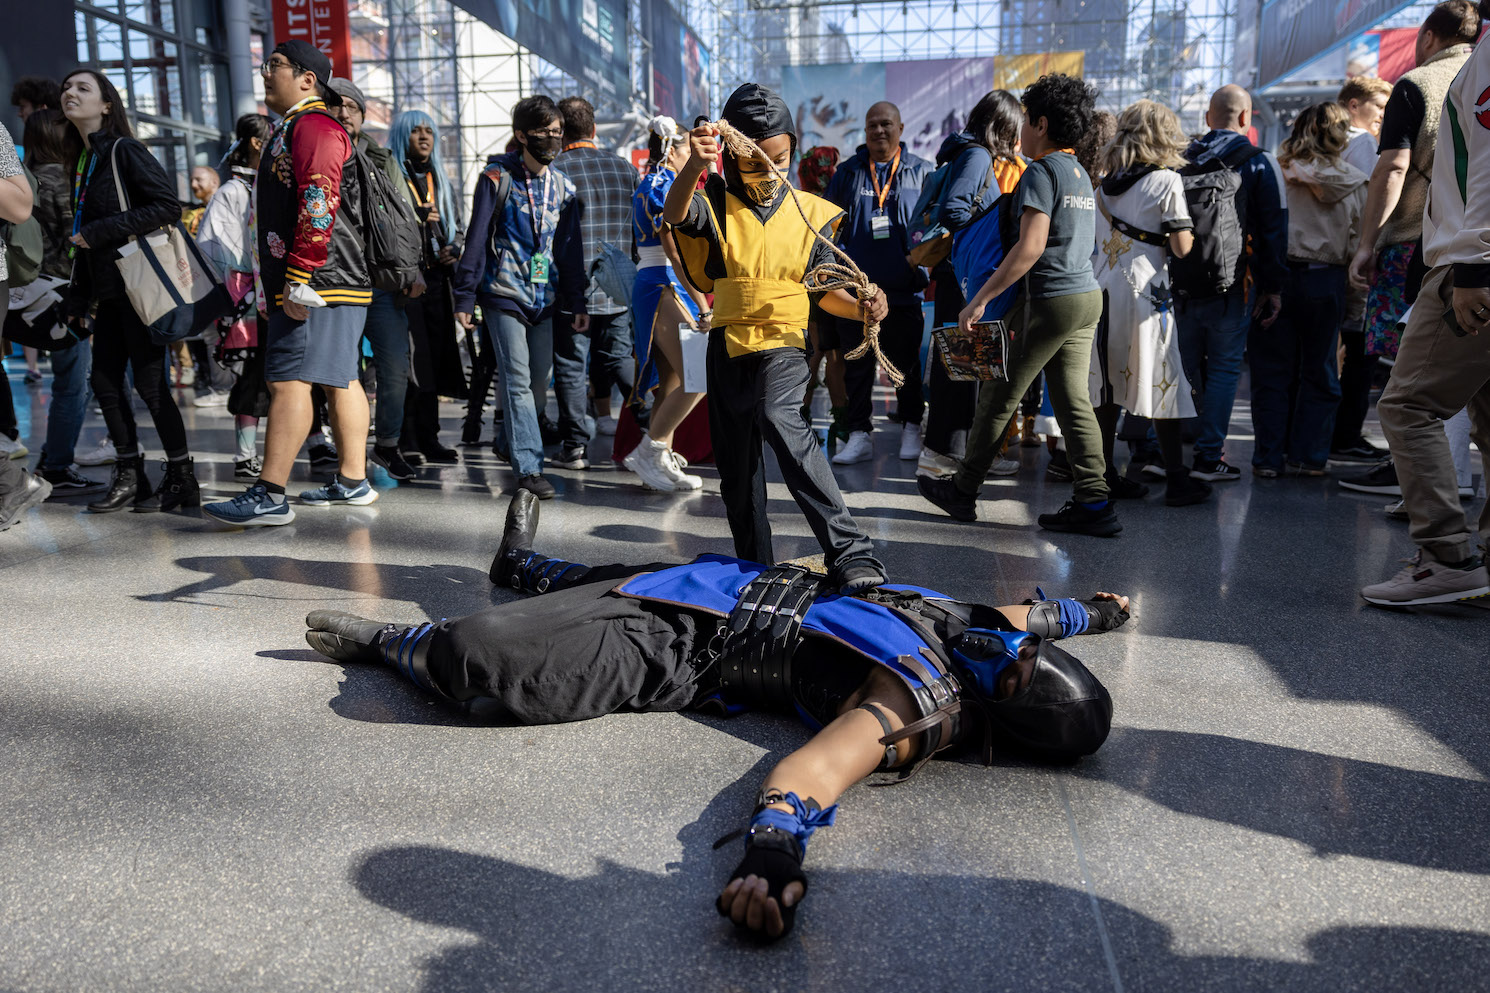 Two cosplayers dressed in Mortal Kombat costumes act out a fight scene. A cosplayer in black-and-blue combat gear lays on the ground. A child in a similar outfit colored black and gold places one foot on the man's stomach.